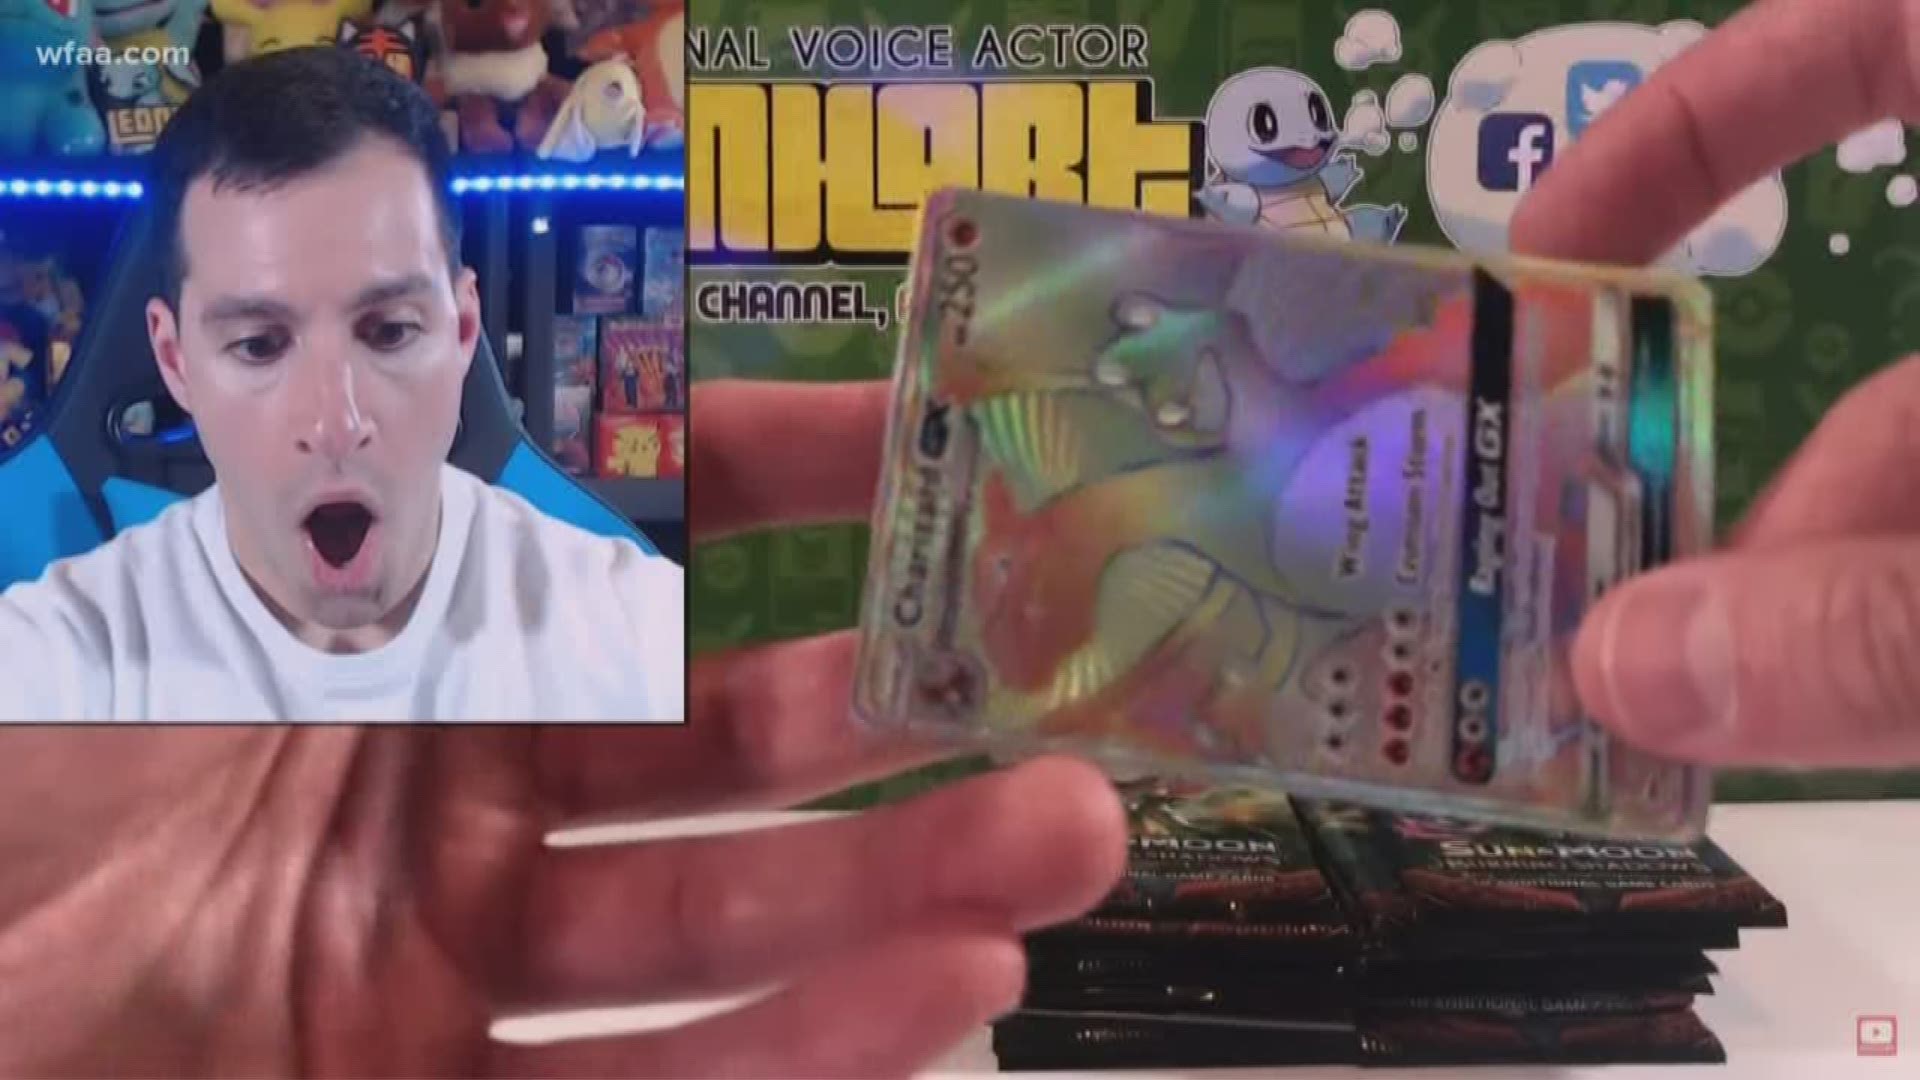 The stuff Pokemon dreams are made of: His job is opening Pokémon cards, but his passion is helping others